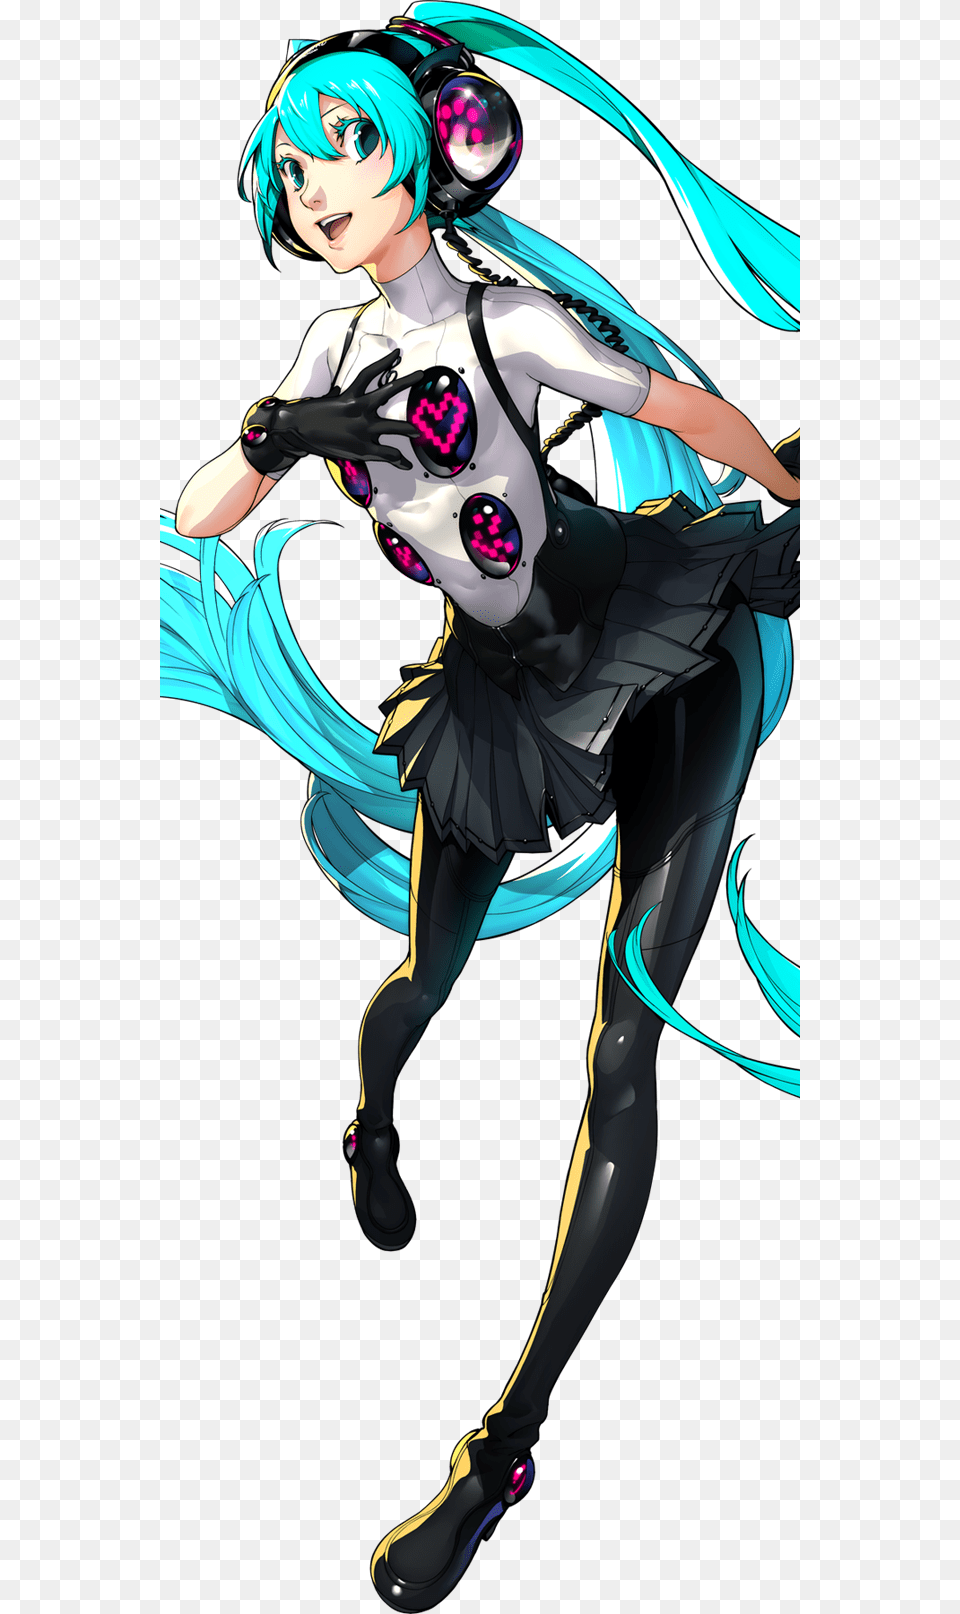 Hatsune Miku Quot The Renowned Vocaloid Composer Atols39 Hatsune Miku Persona Dancing All Night, Book, Comics, Publication, Adult Free Transparent Png